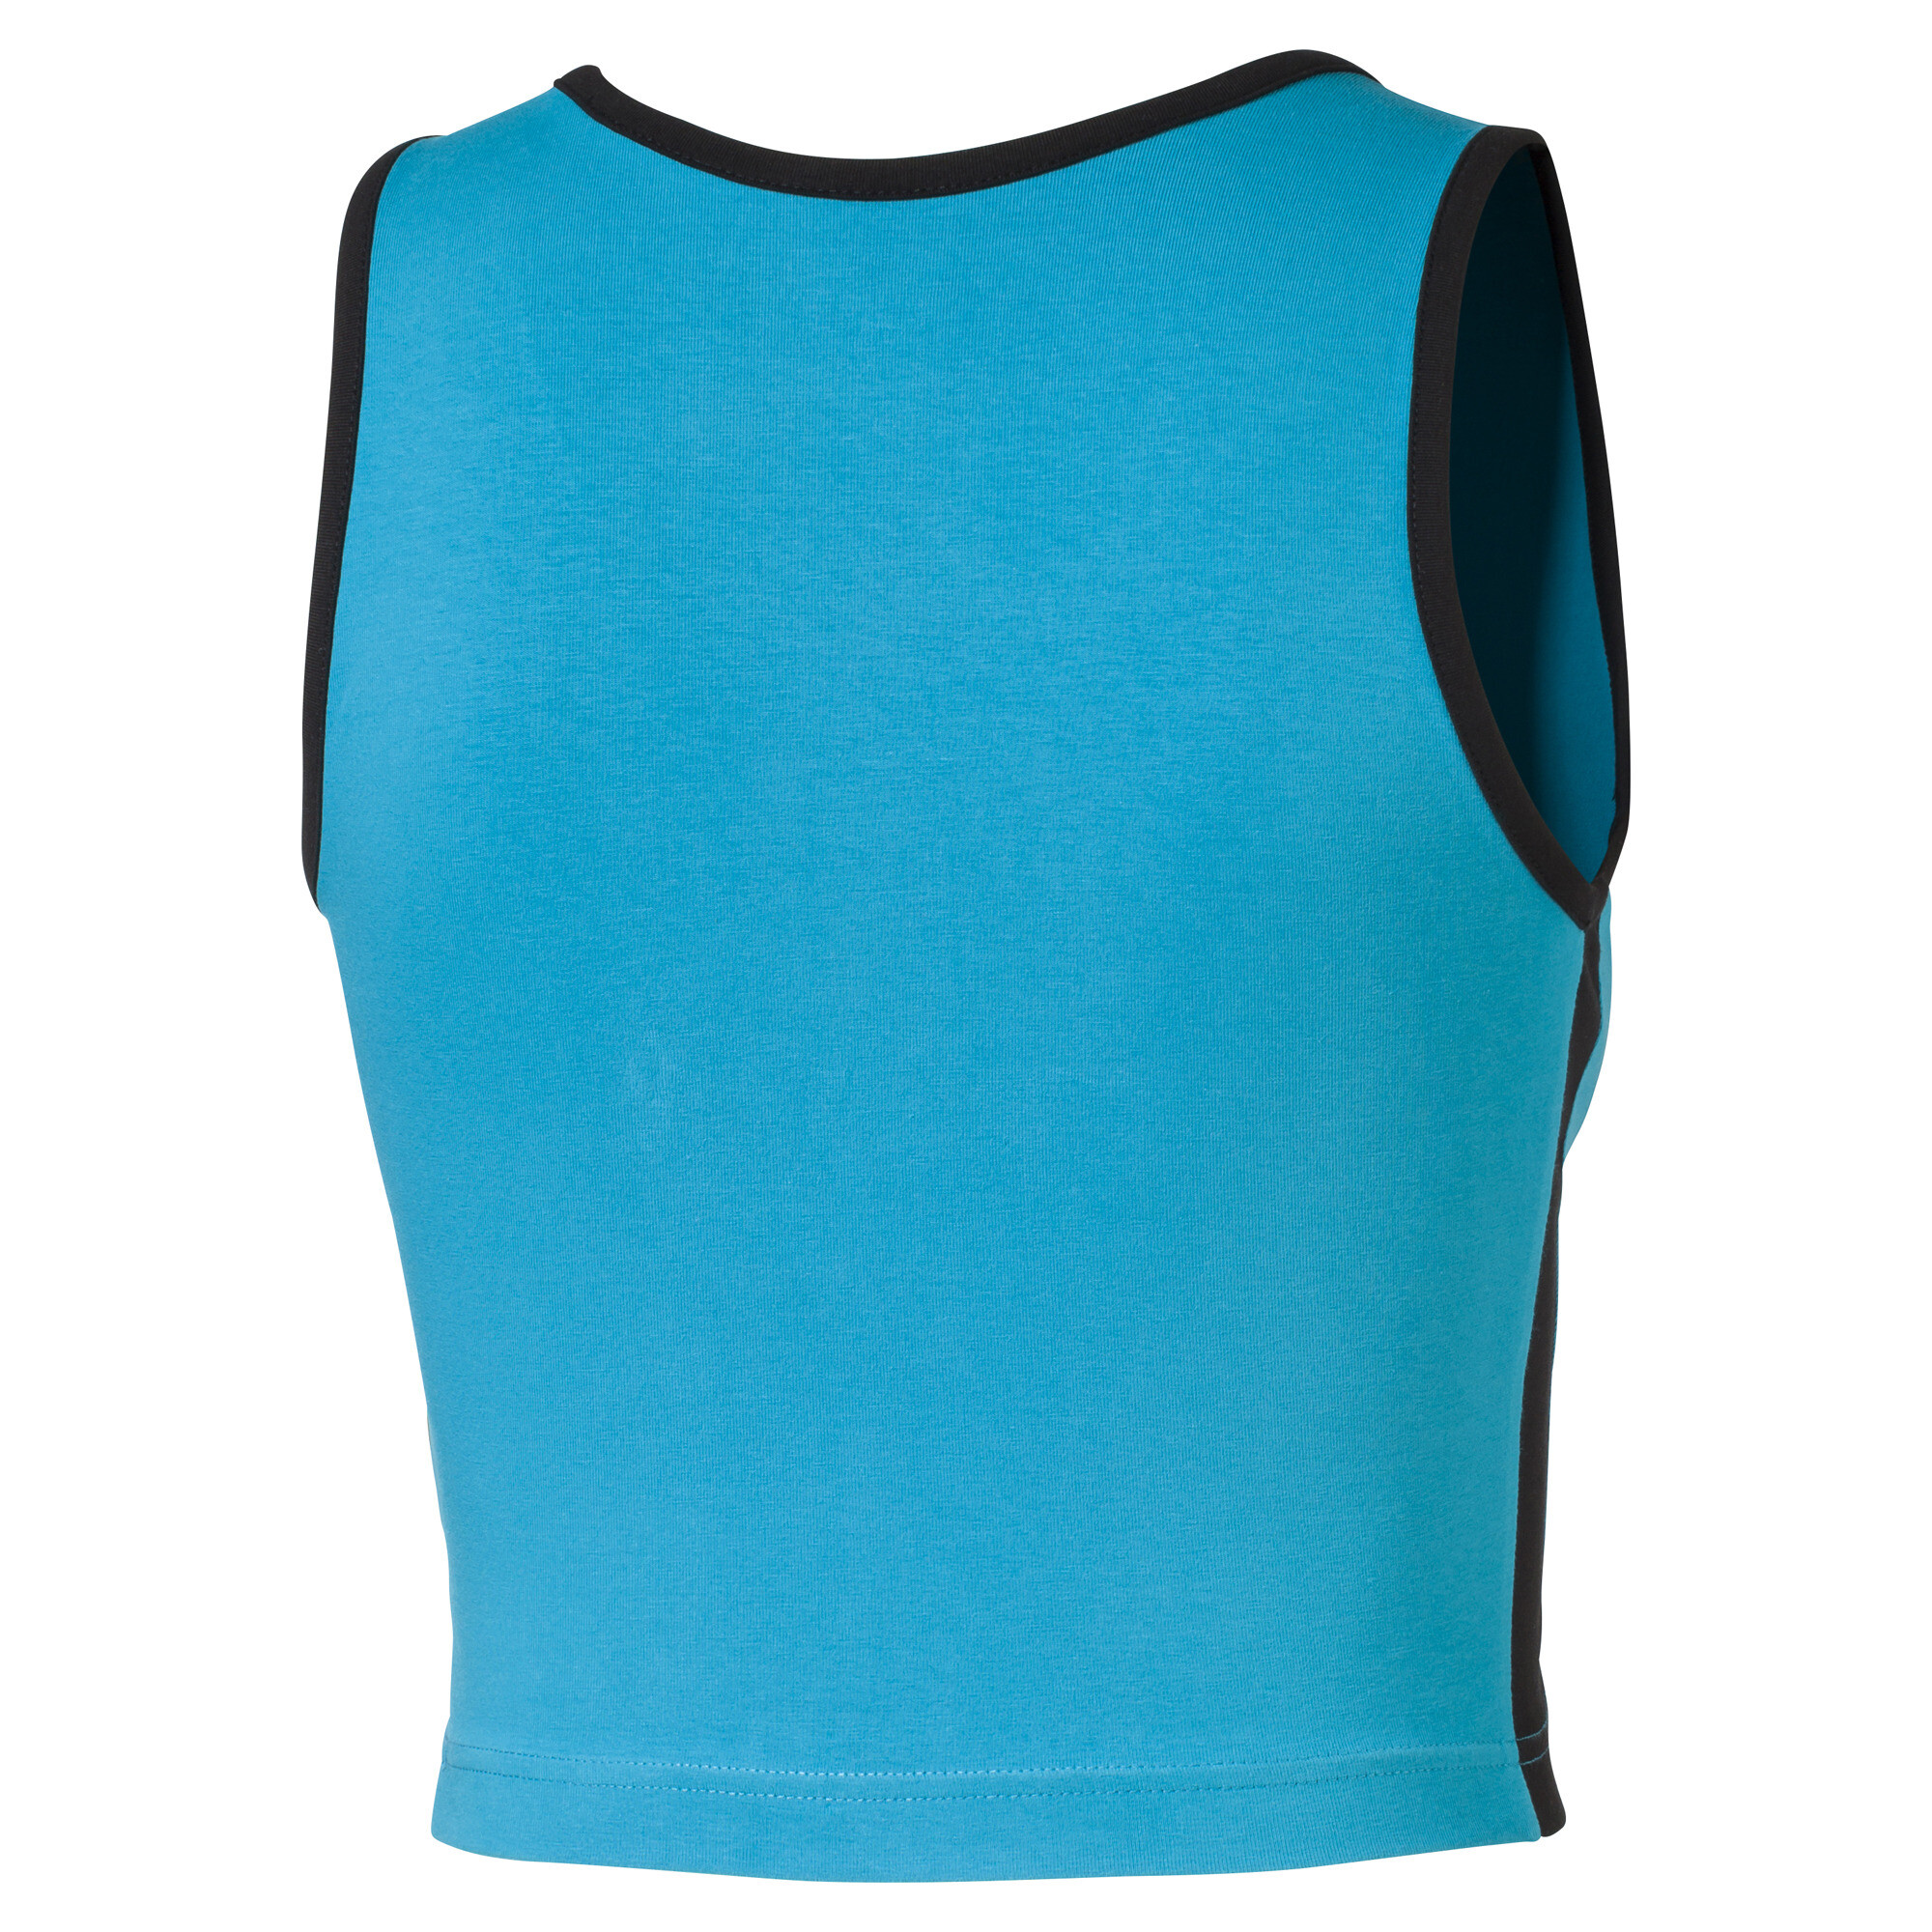 Women's Puma Classics T7 Cropped's Tank Top, Blue, Size S, Clothing